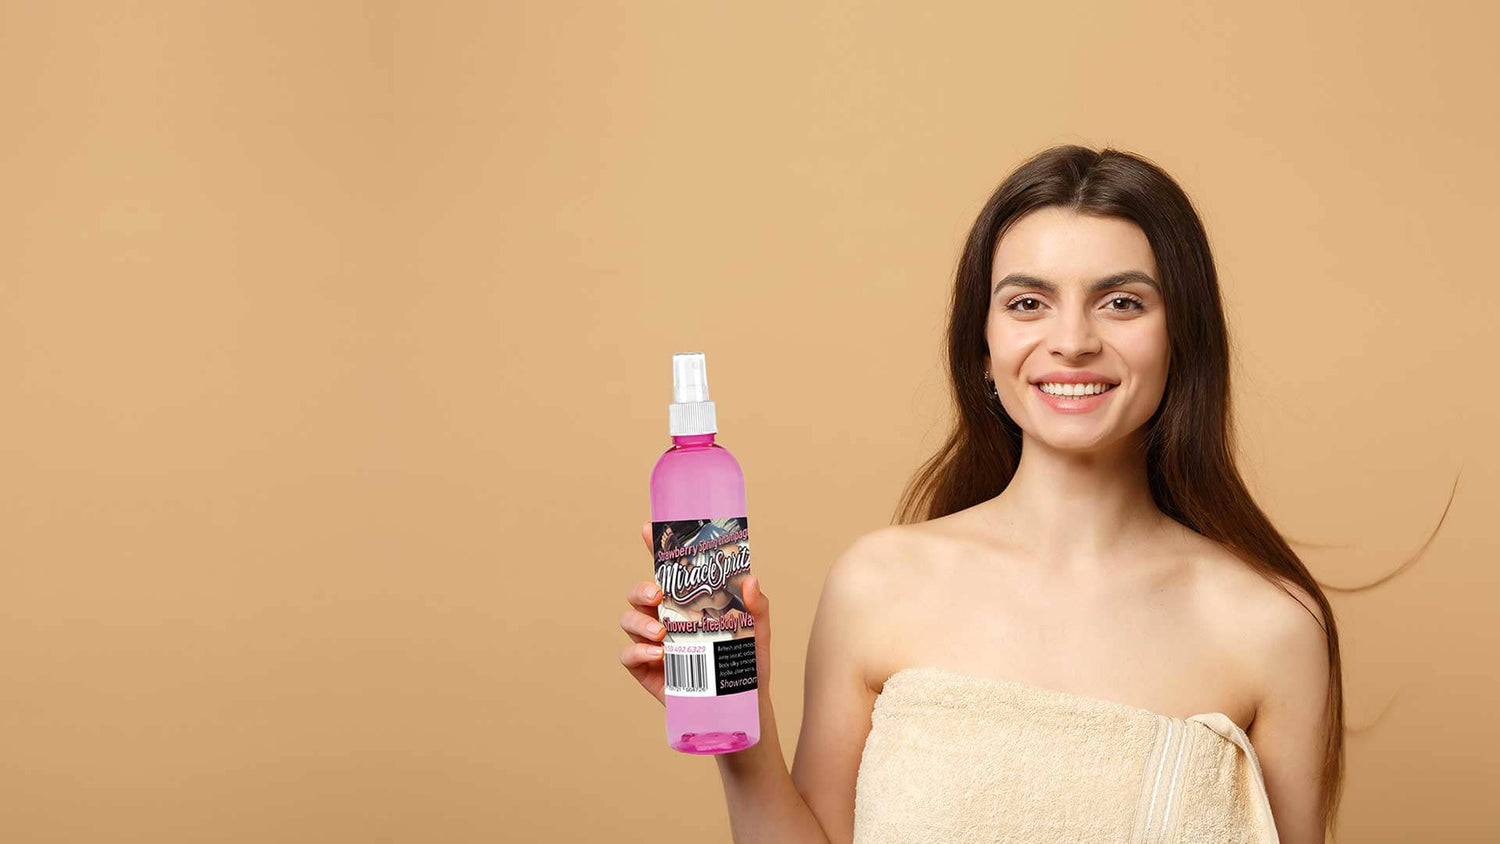 a female model, is holding a bottle of Miracle Spritz